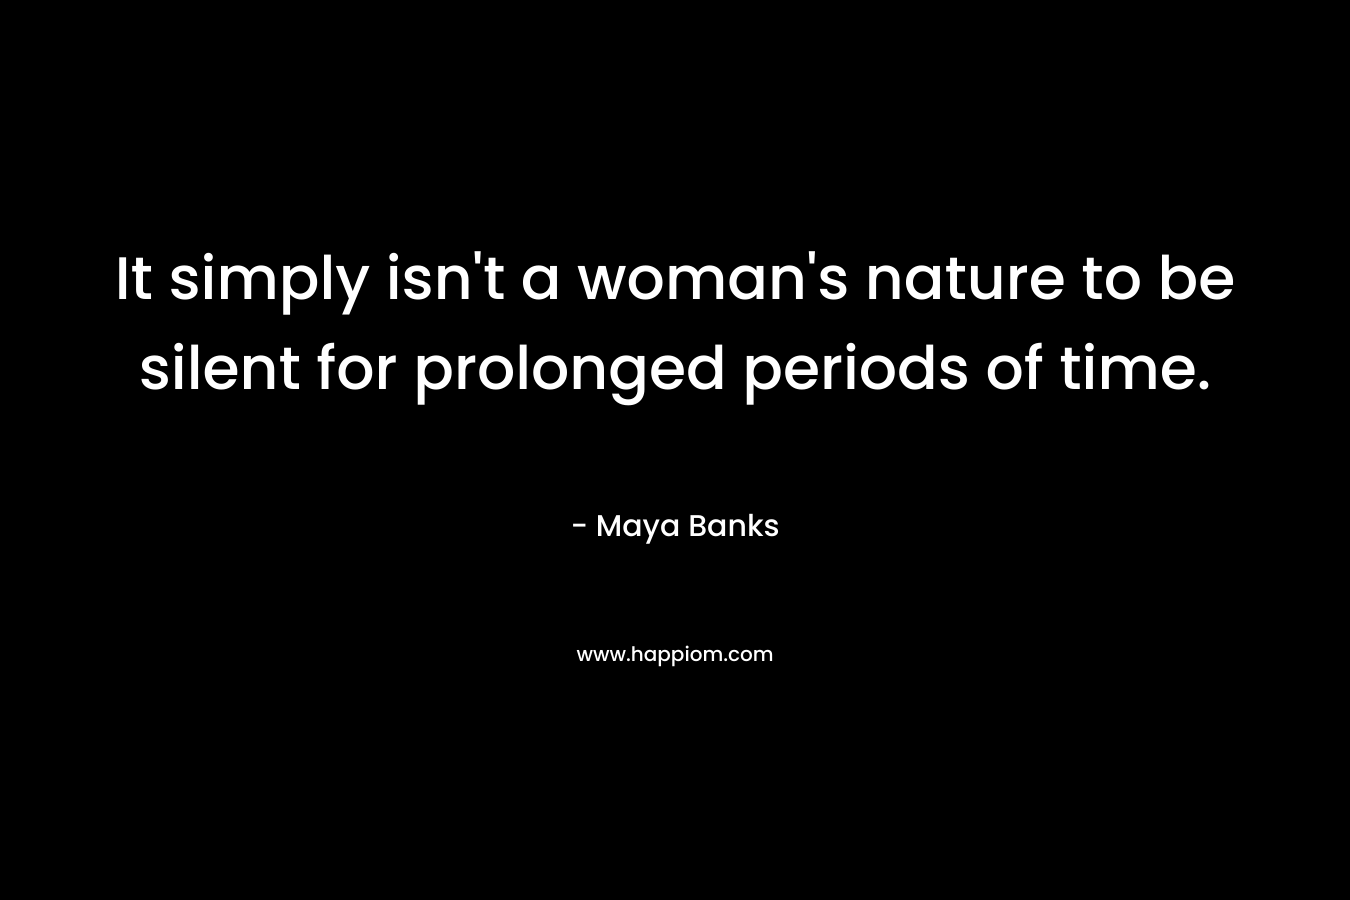 It simply isn’t a woman’s nature to be silent for prolonged periods of time. – Maya Banks